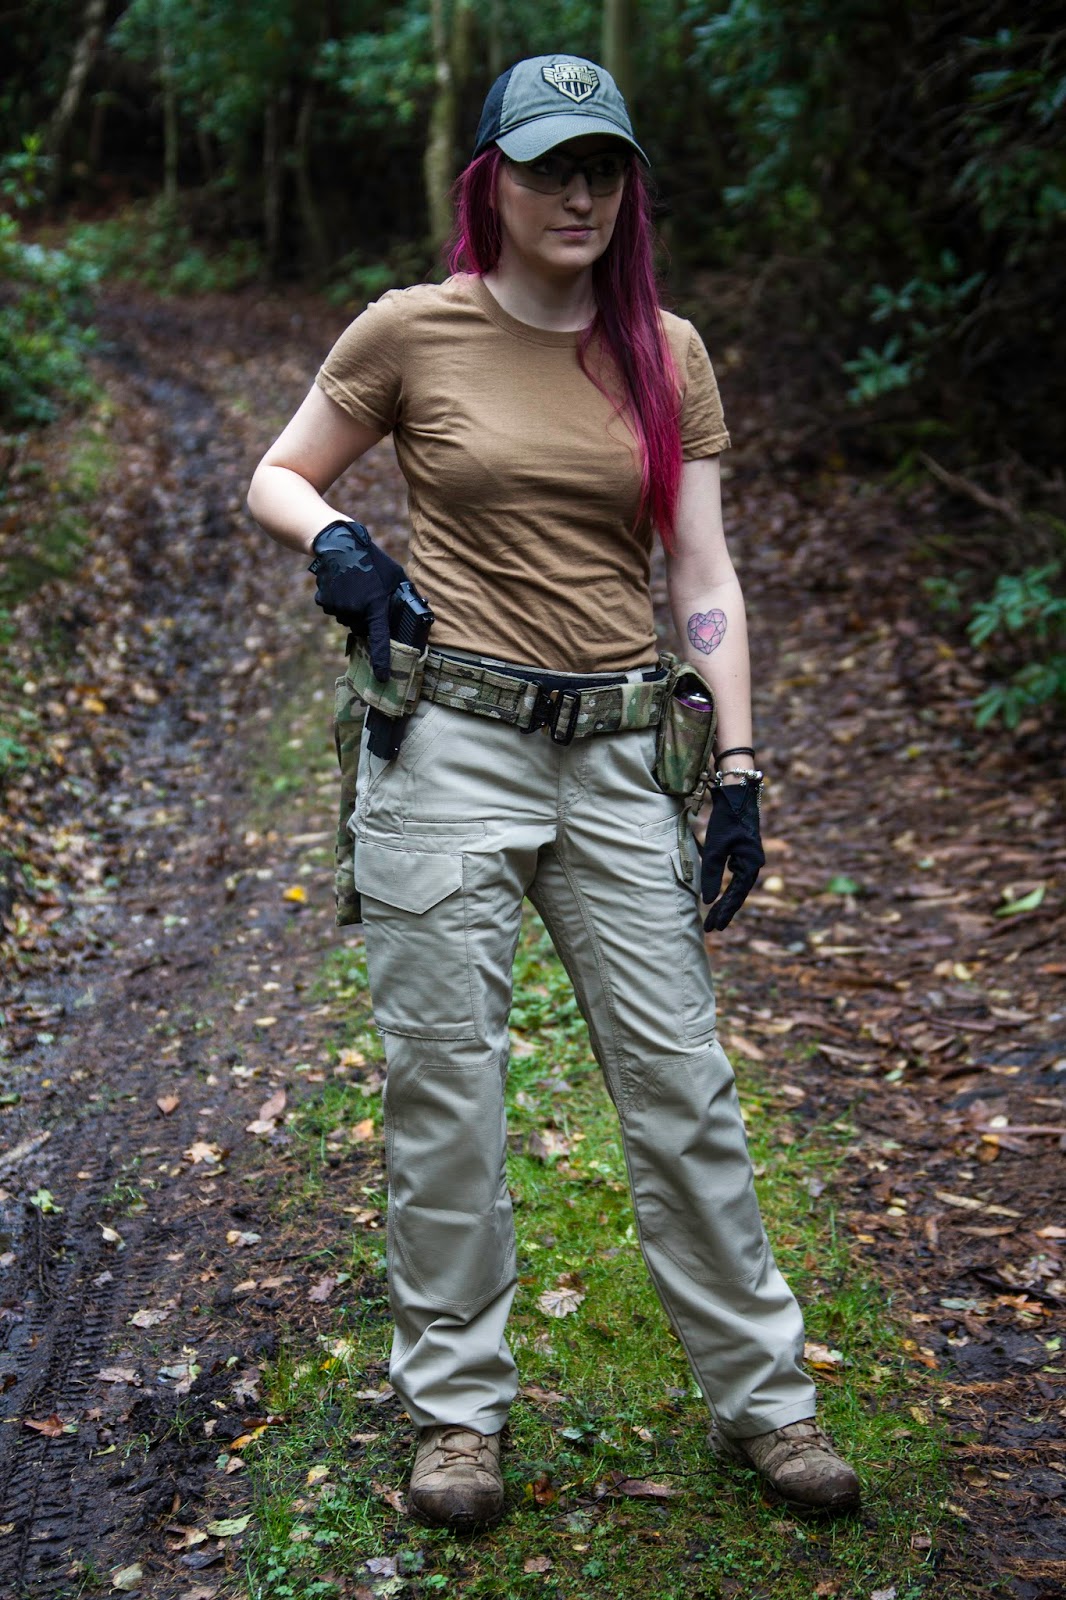 FIRST TACTICAL WOMEN'S SPECIALIST TACTICAL PANTS REVIEW! - Femme Fatale  Airsoft